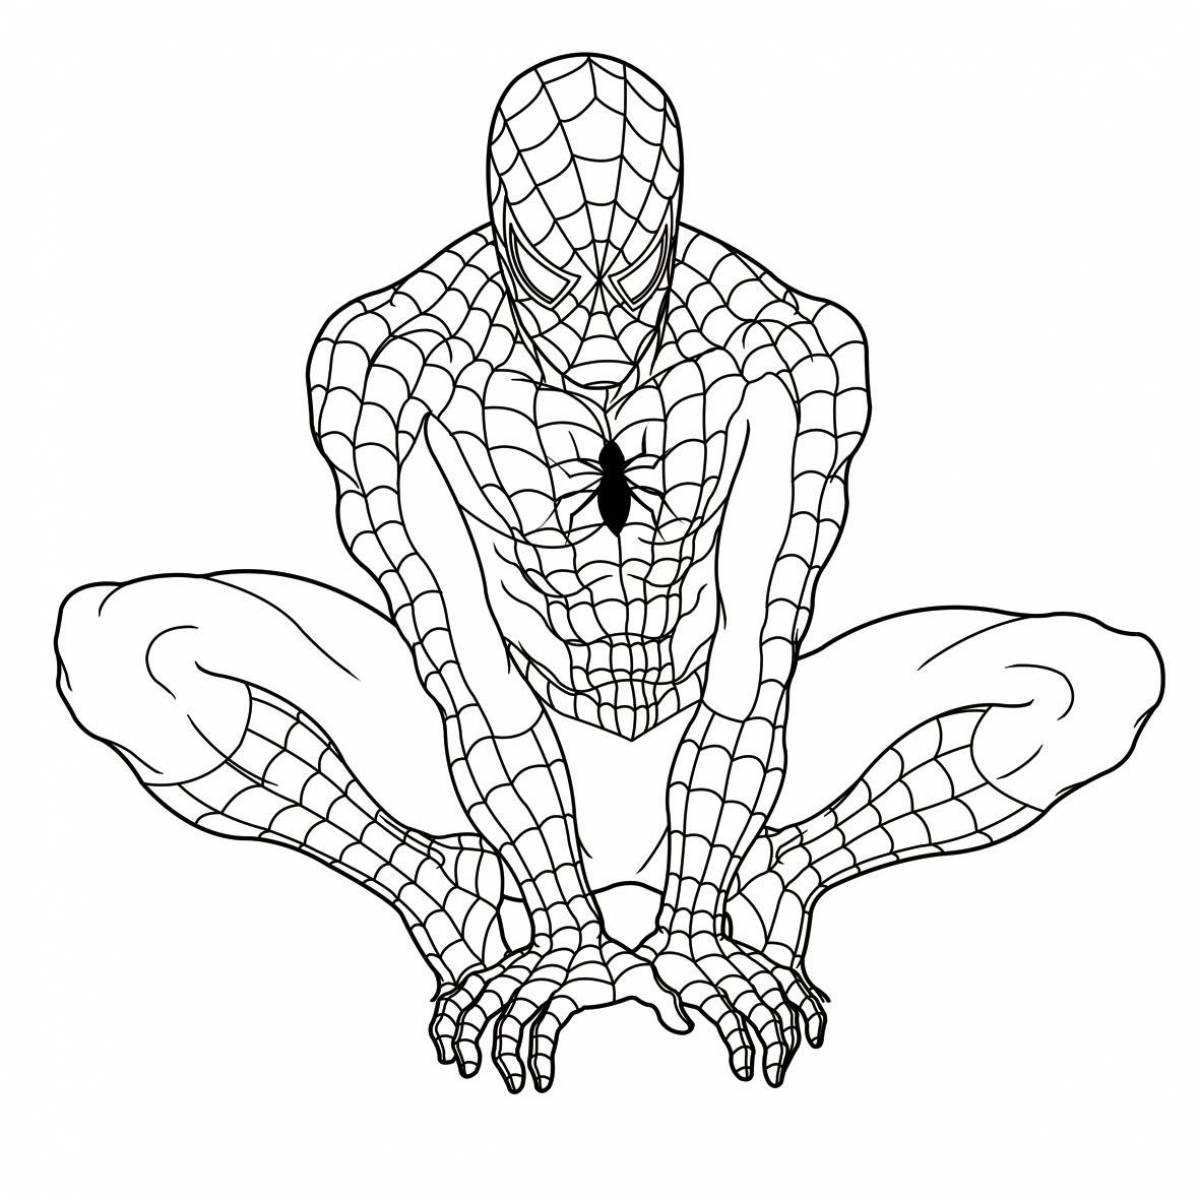 Spiderman's awesome coloring book